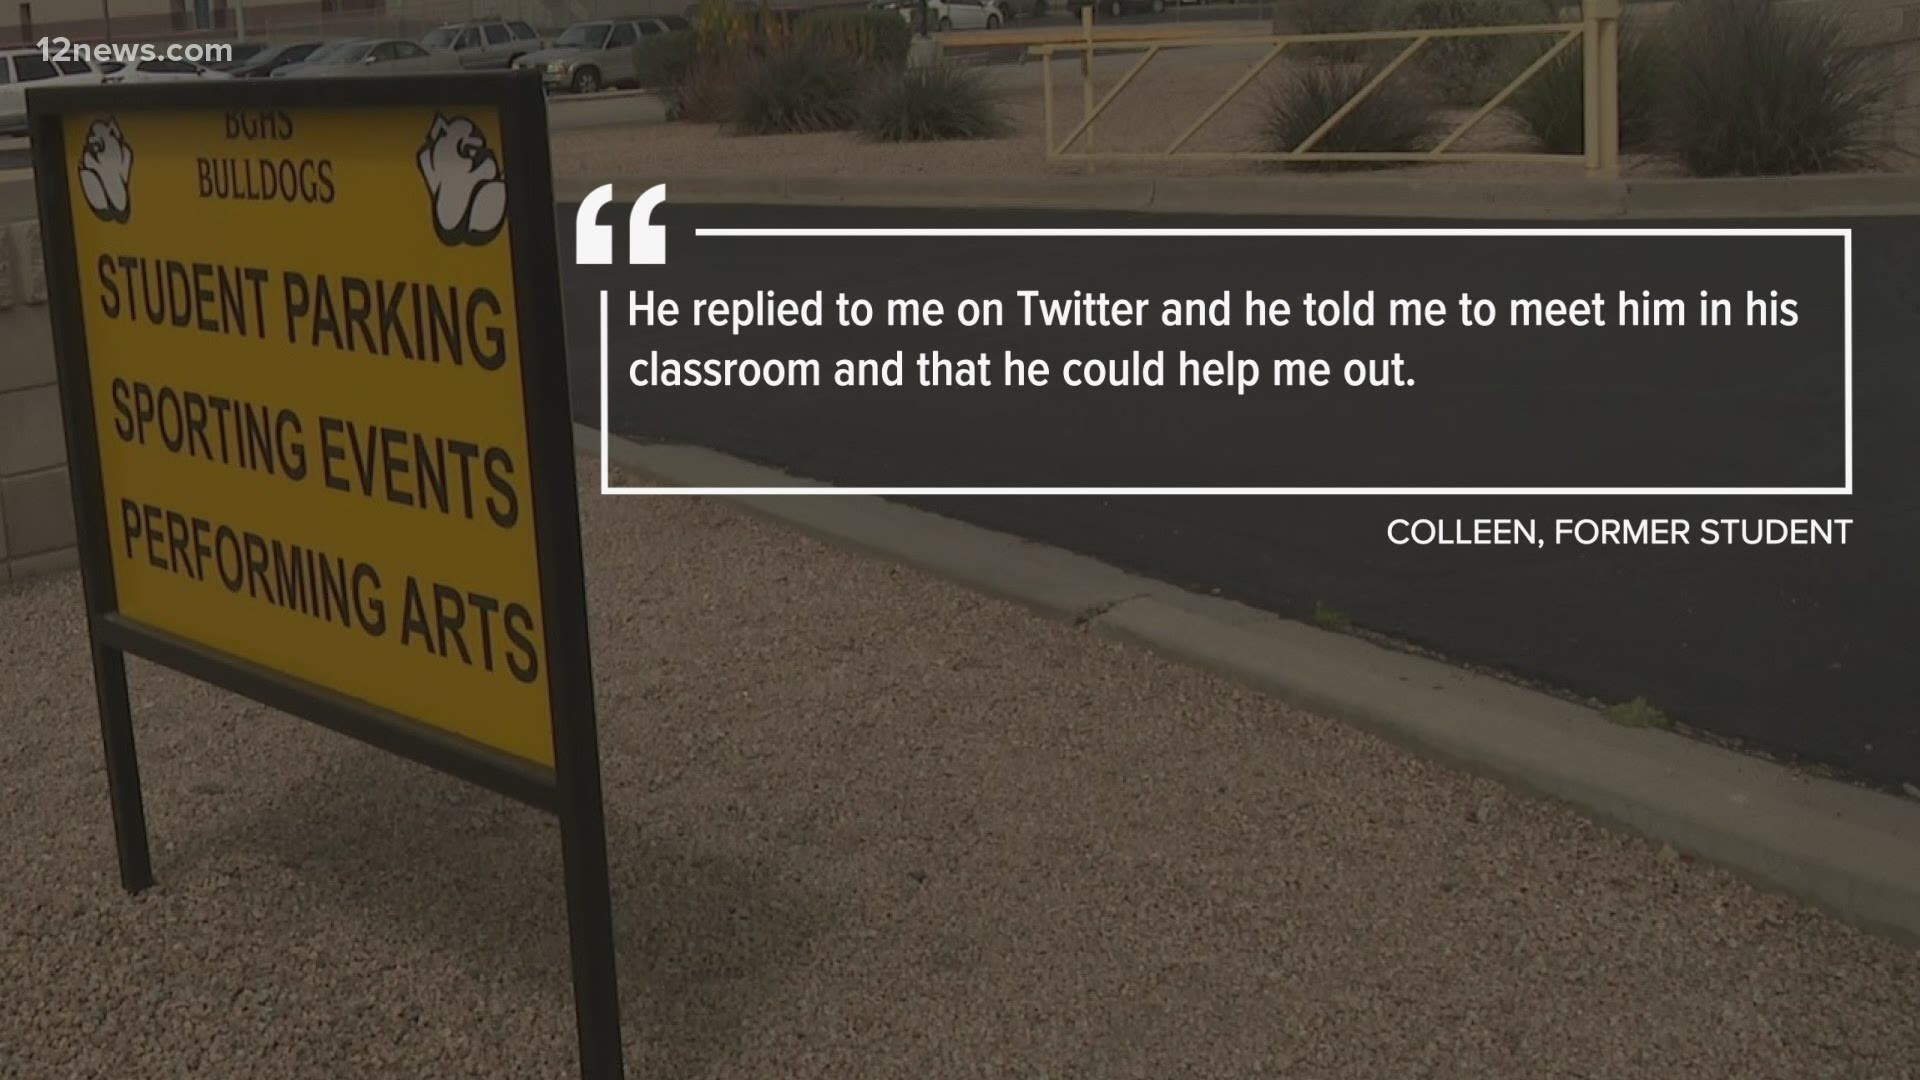 A Valley high school teacher has been placed on administrative leave after dozens of reports saying he was inappropriately messaging girls on social media.